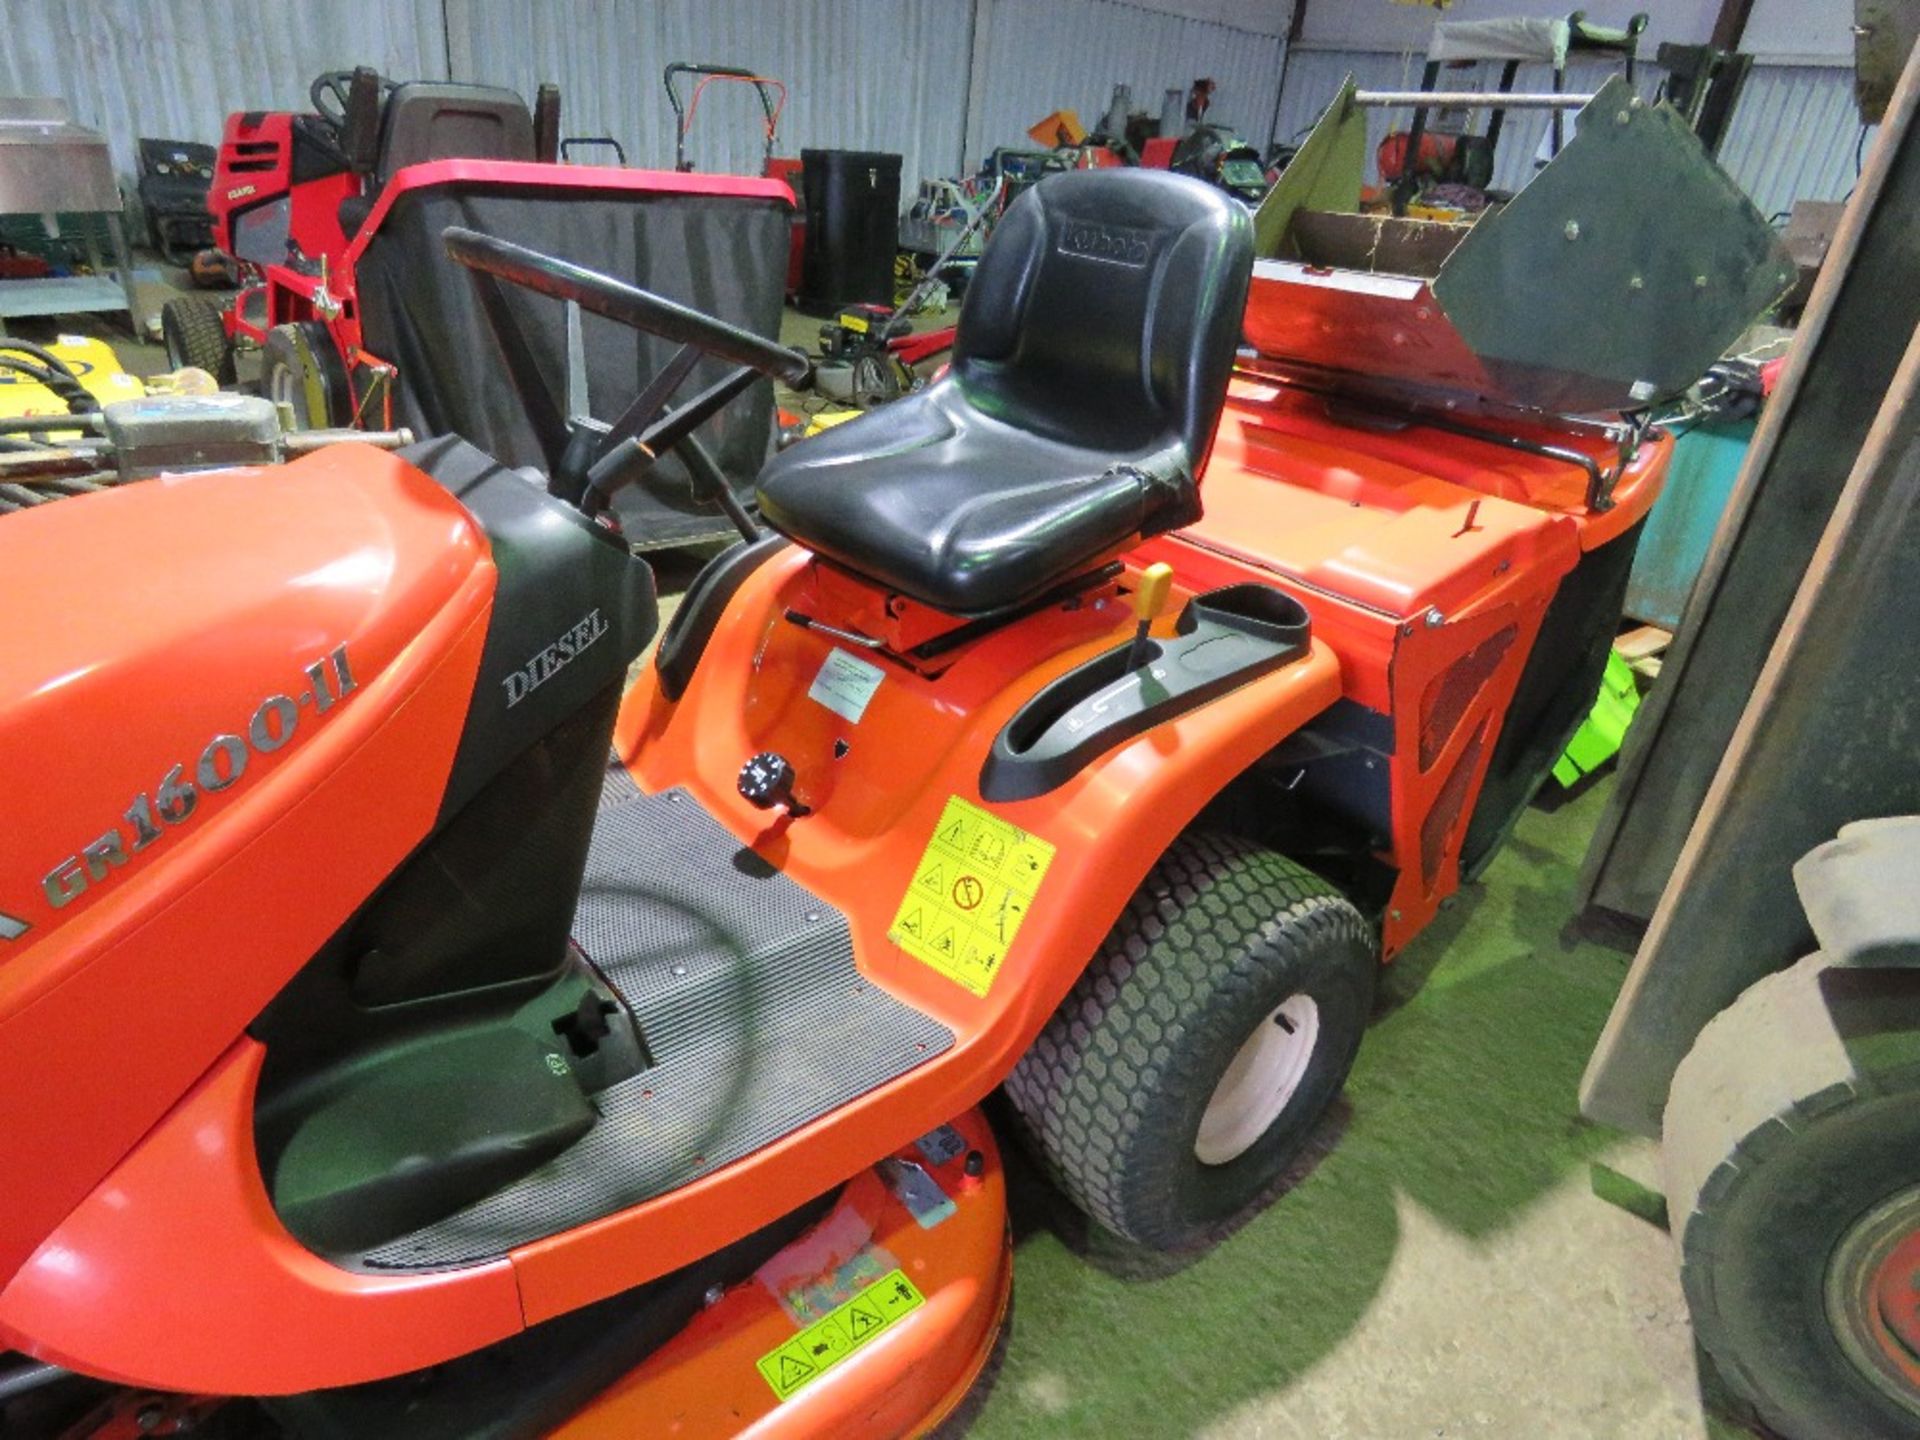 KUBOTA GR1600-II DIESEL RIDE ON MOWER WITH REAR COLLECTOR PLUS DISCHARGE CHUTE. SN:30142. WHEN TESTE - Image 4 of 14